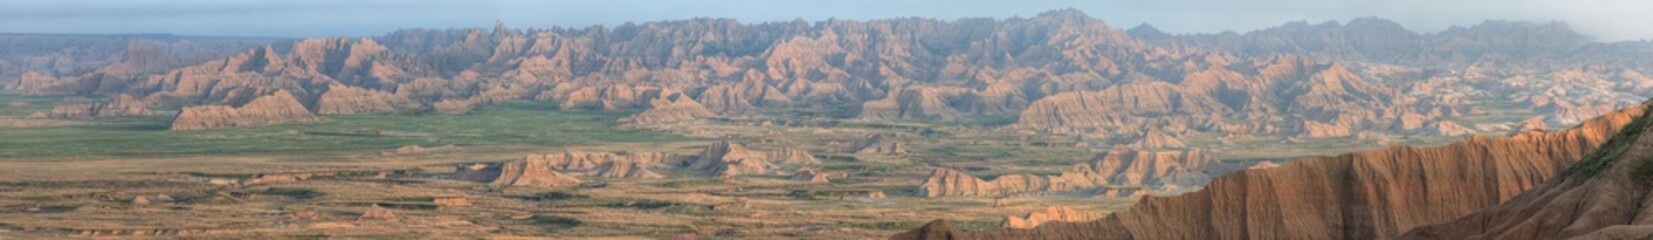 Misty Morning Panorama of the Pinnacles in Badlands National Park